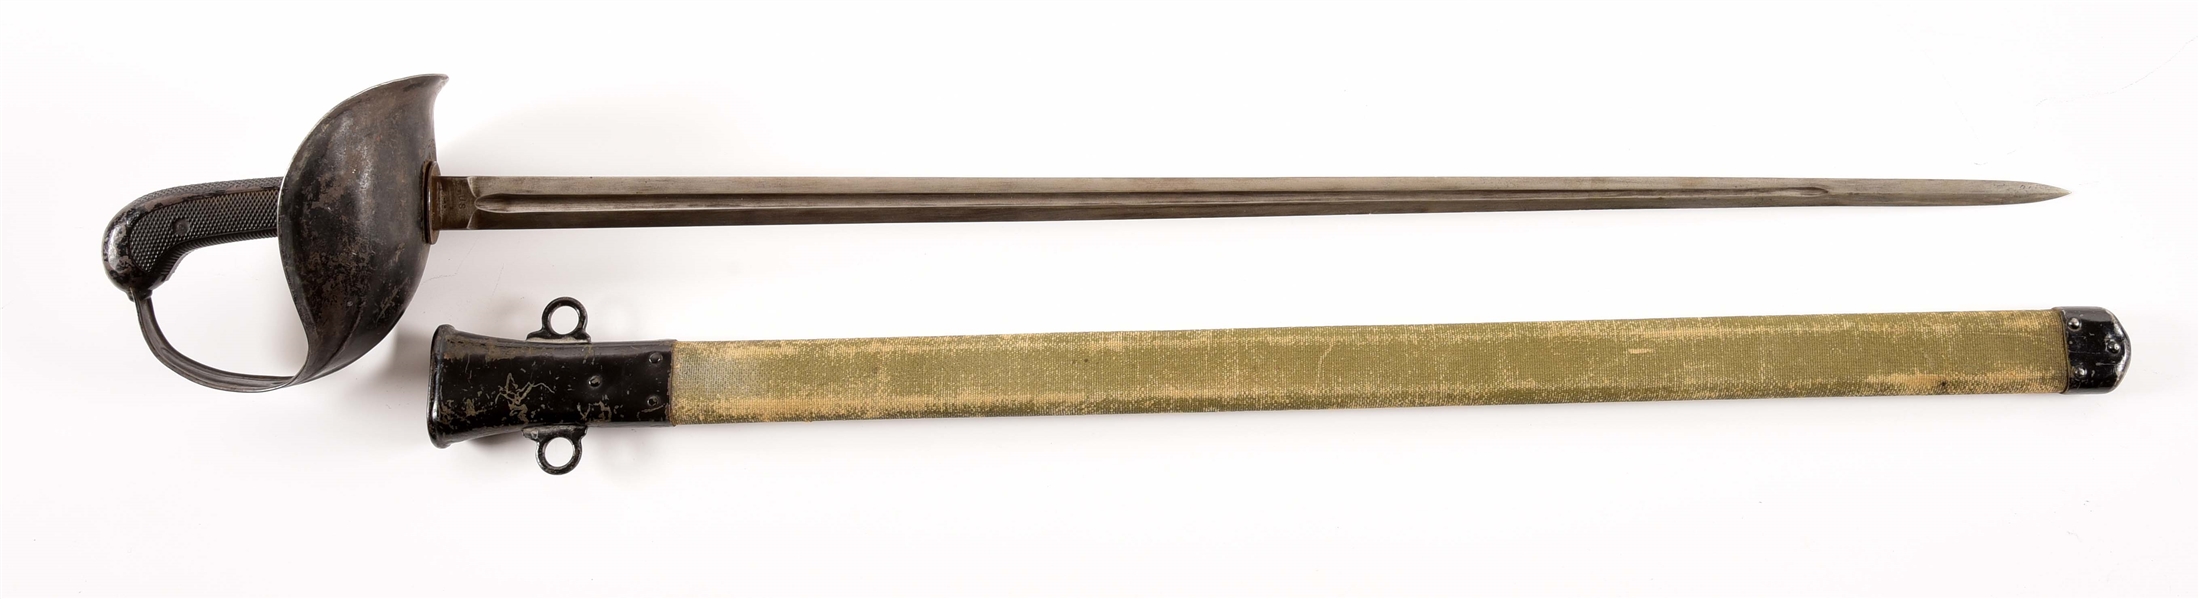 US MODEL 1913 "PATTON" CAVALRY SABER WITH SCABBARD.